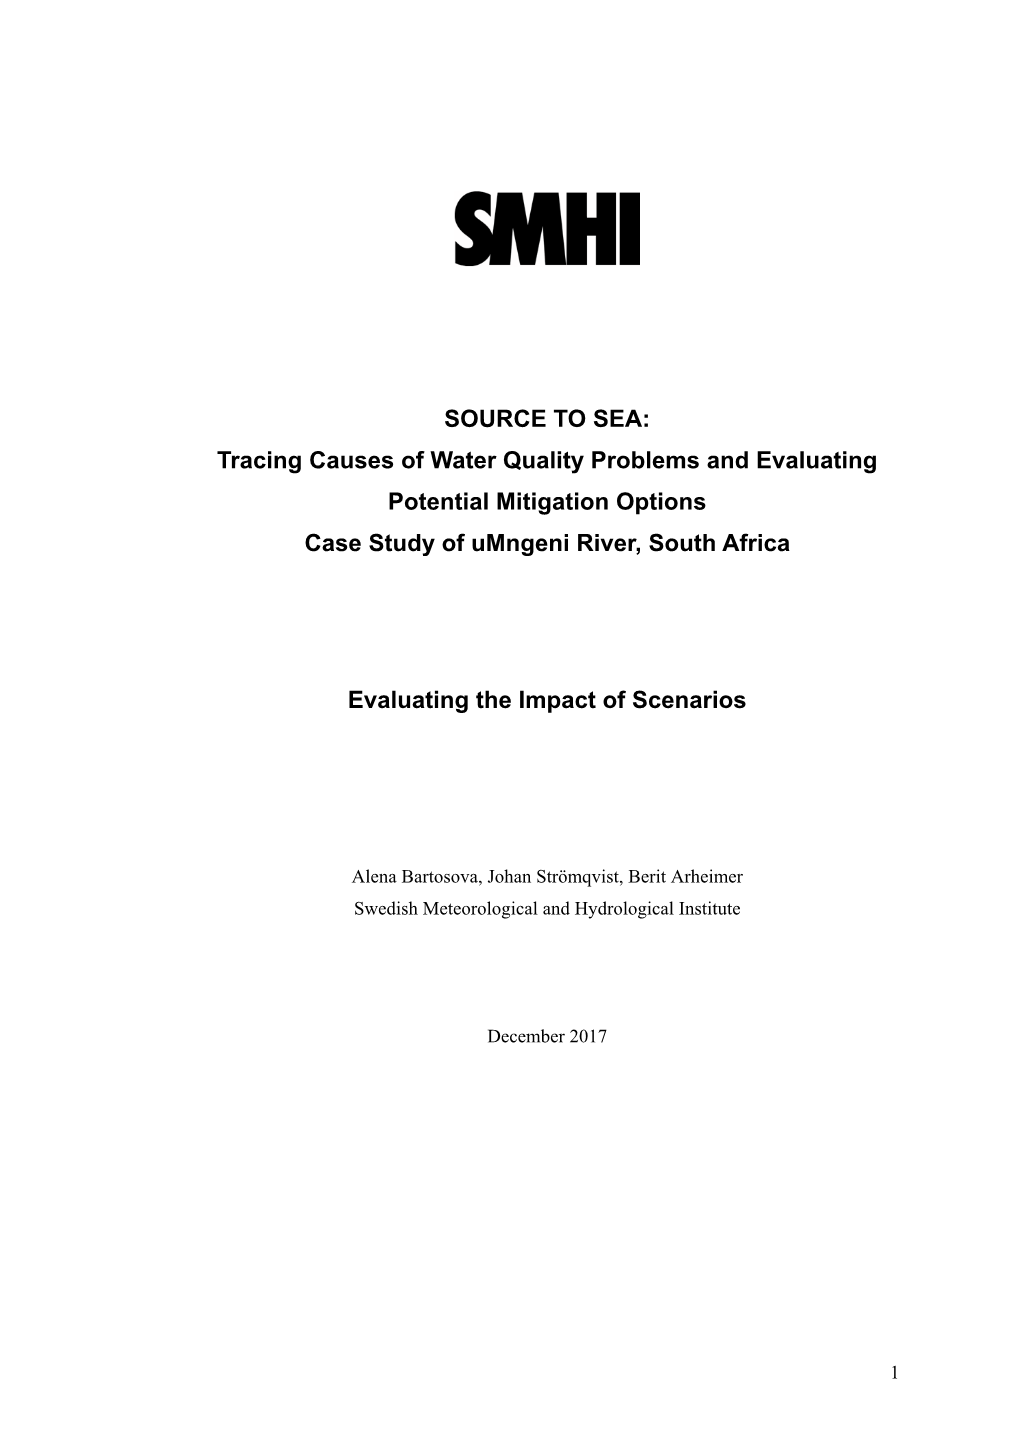 SOURCE to SEA: Tracing Causes of Water Quality Problems and Evaluating Potential Mitigation Options Case Study of Umngeni River, South Africa